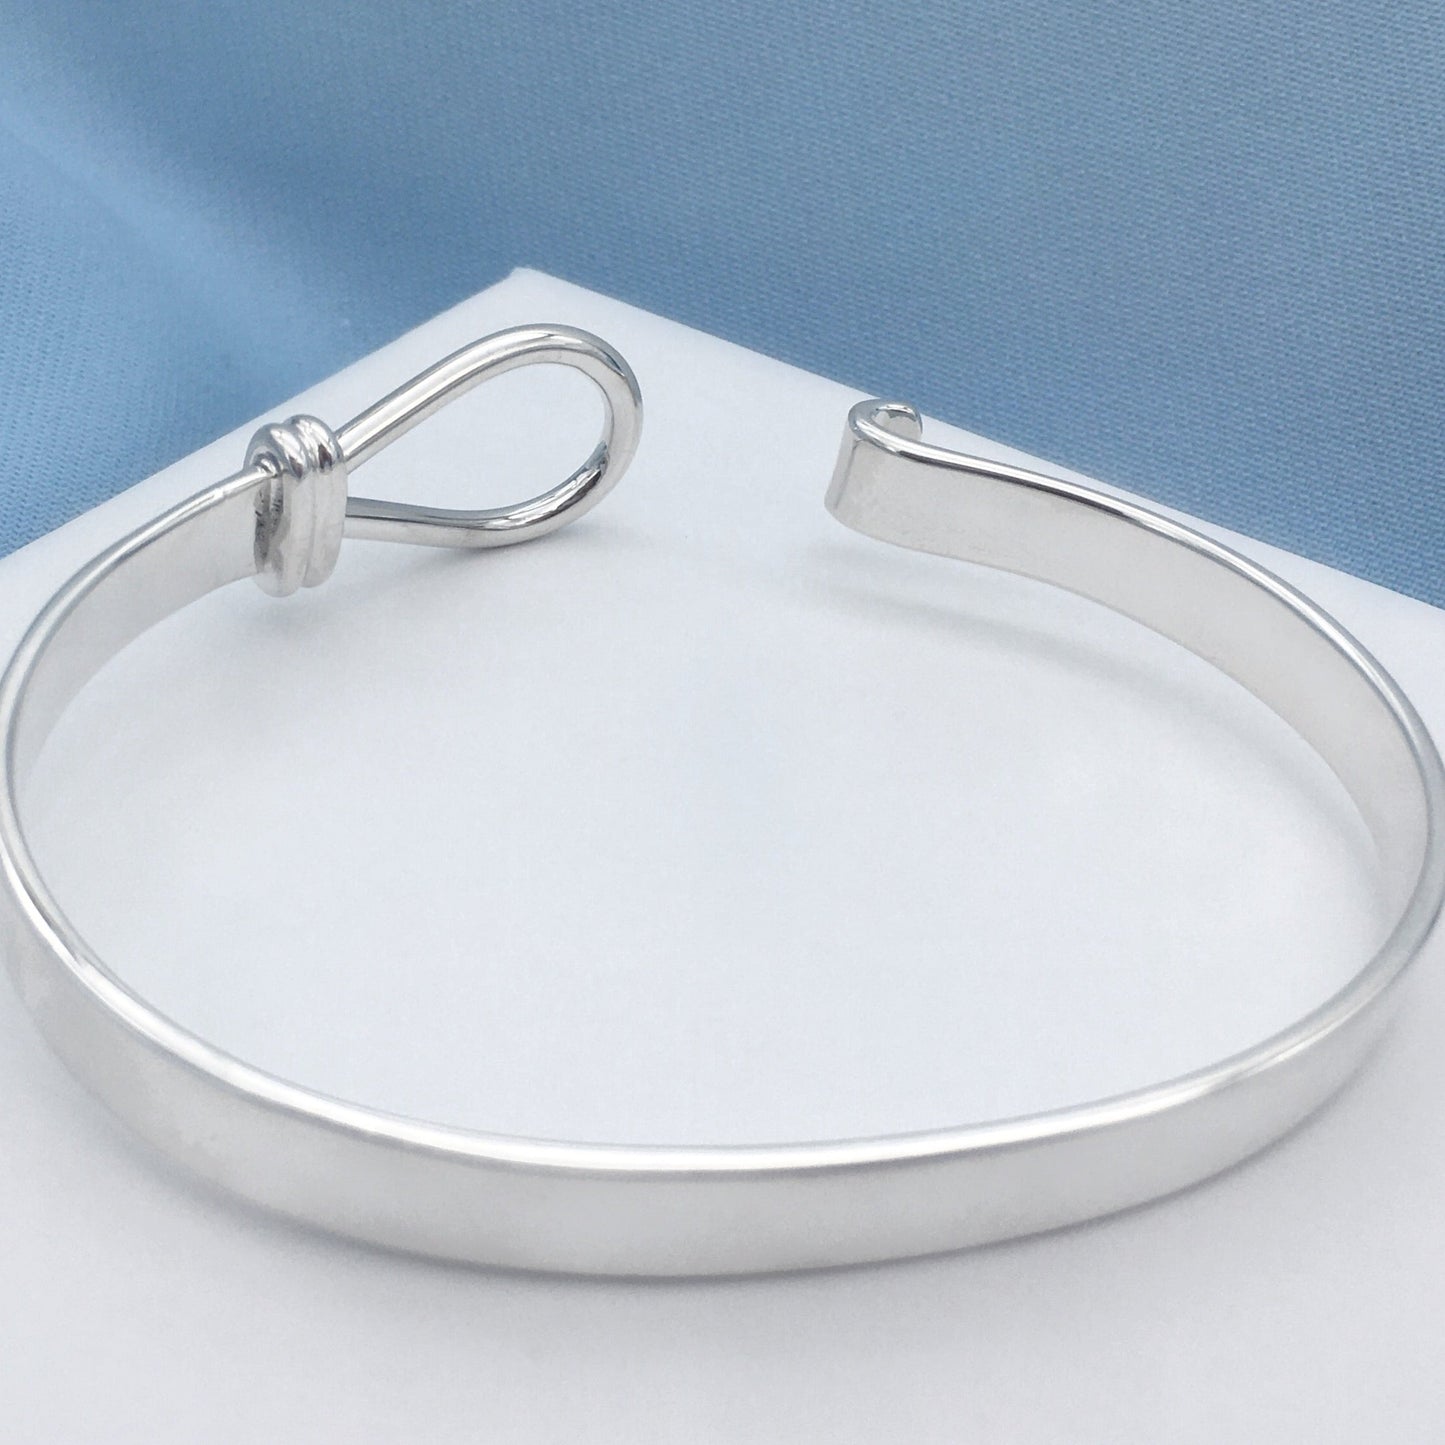 Rope Hook Silver Bangle Bracelet for Small Wrist